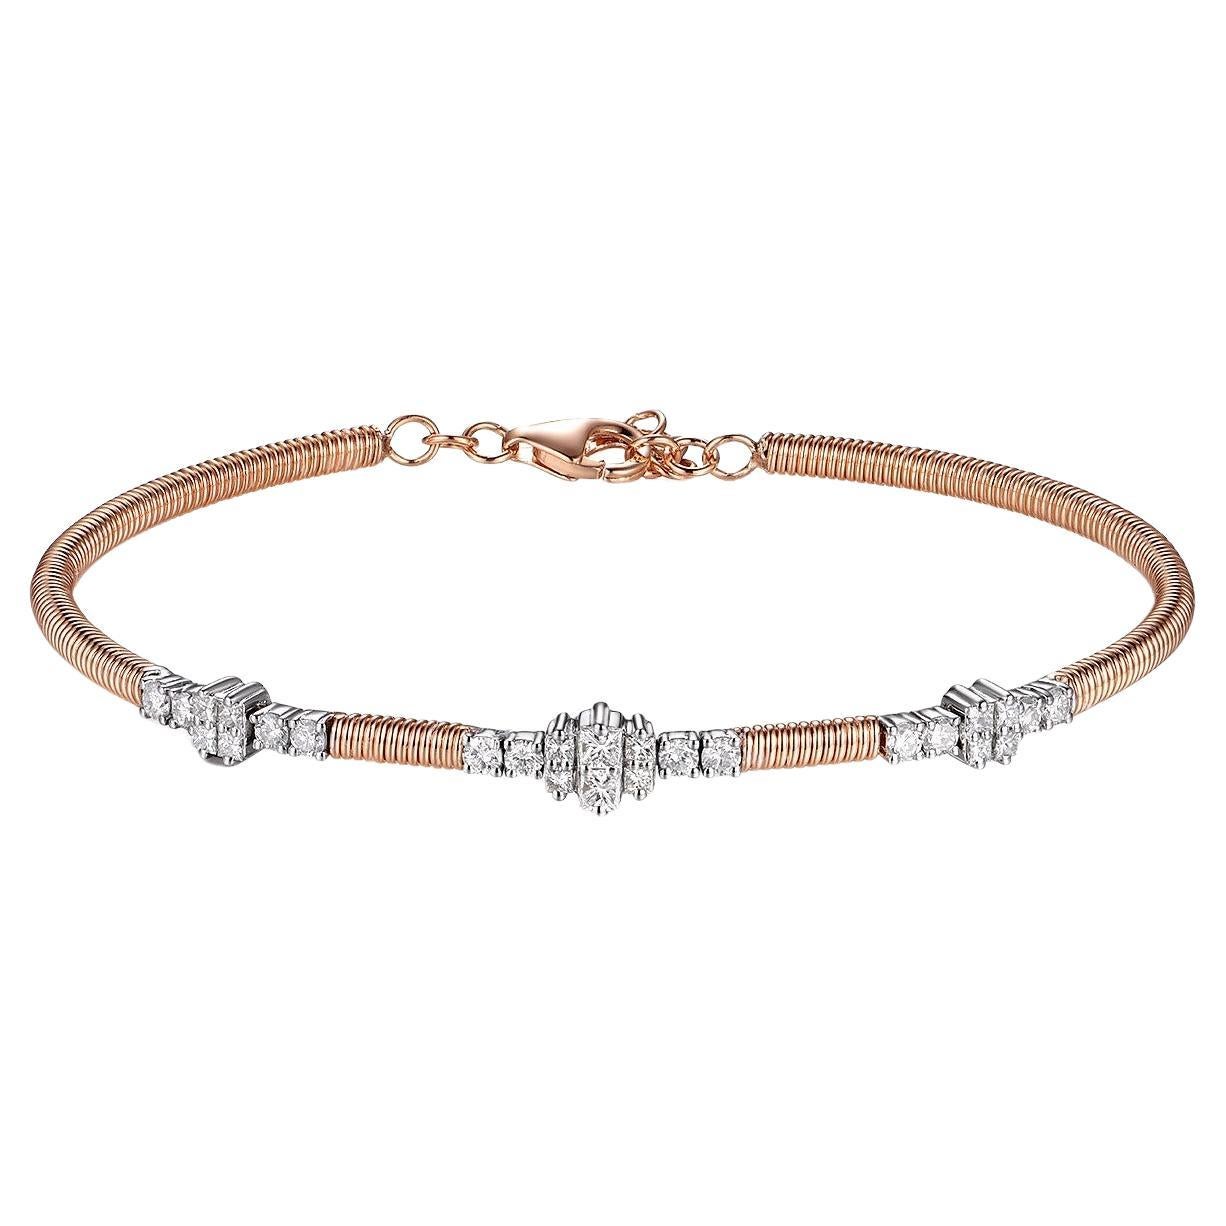 The 0.66 Carat Diamond Bangle Bracelet in 18K White and Rose Gold is a stunning piece of jewelry that seamlessly blends elegance and modern sophistication. This bracelet features a captivating combination of princess cut and round diamonds set in a